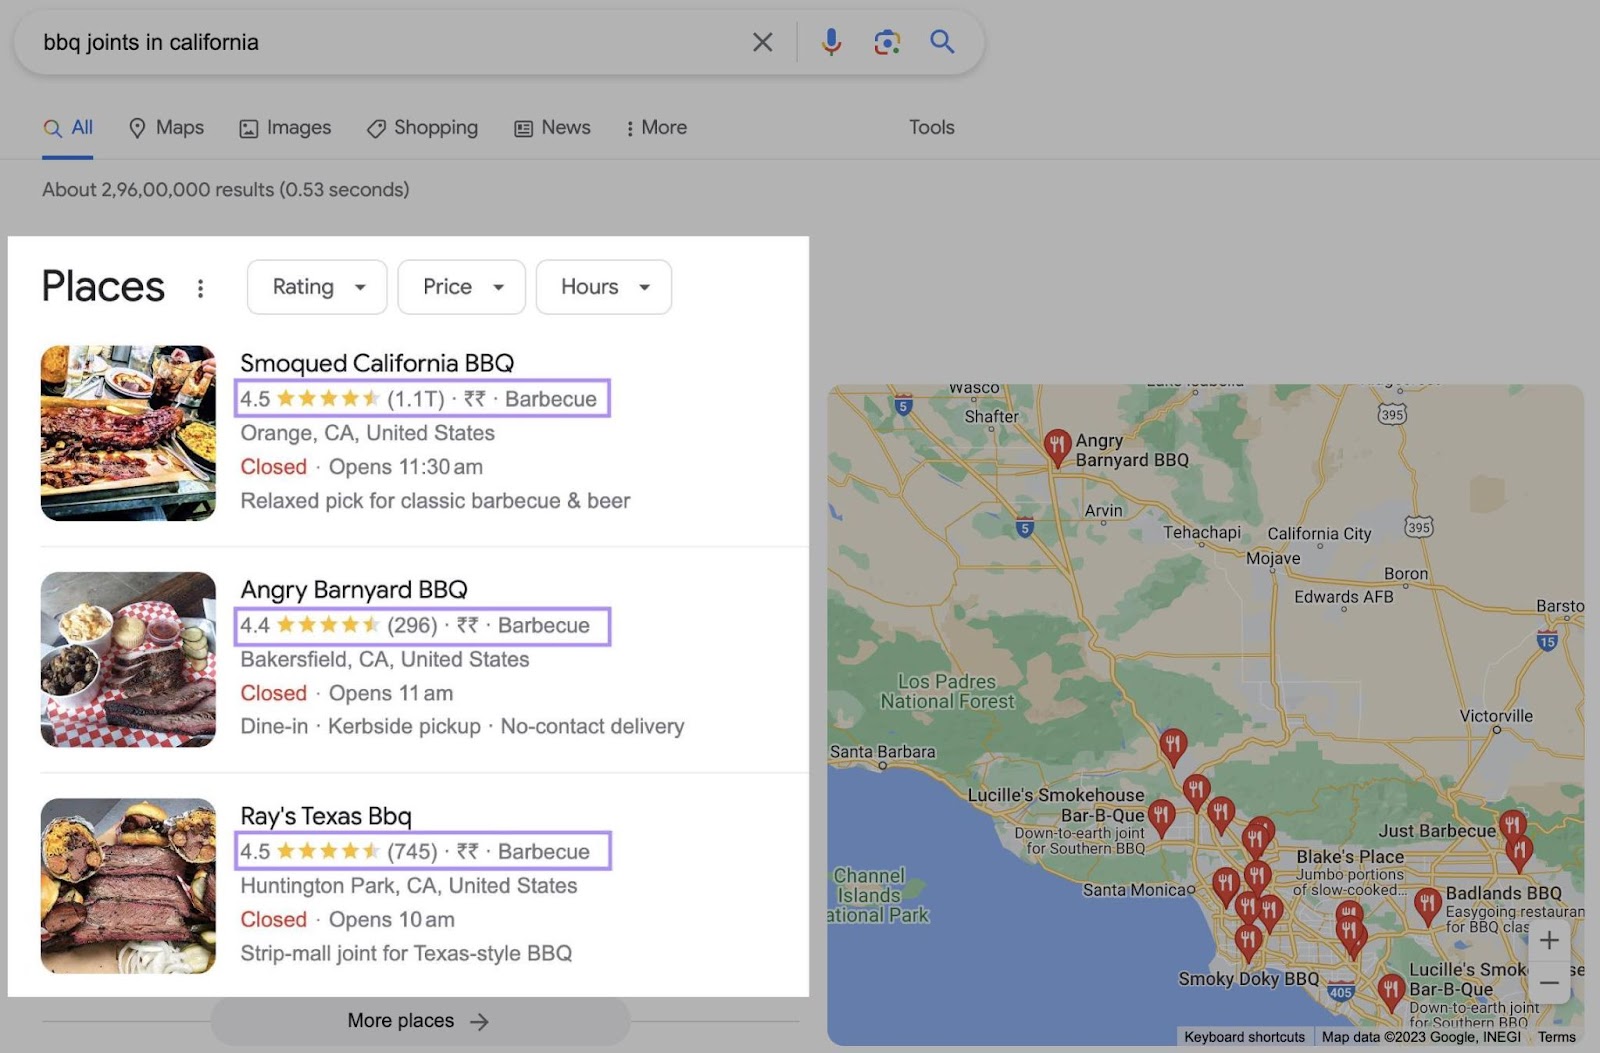 Google ratings shown for top-ranking map results are above 4.0 in this example